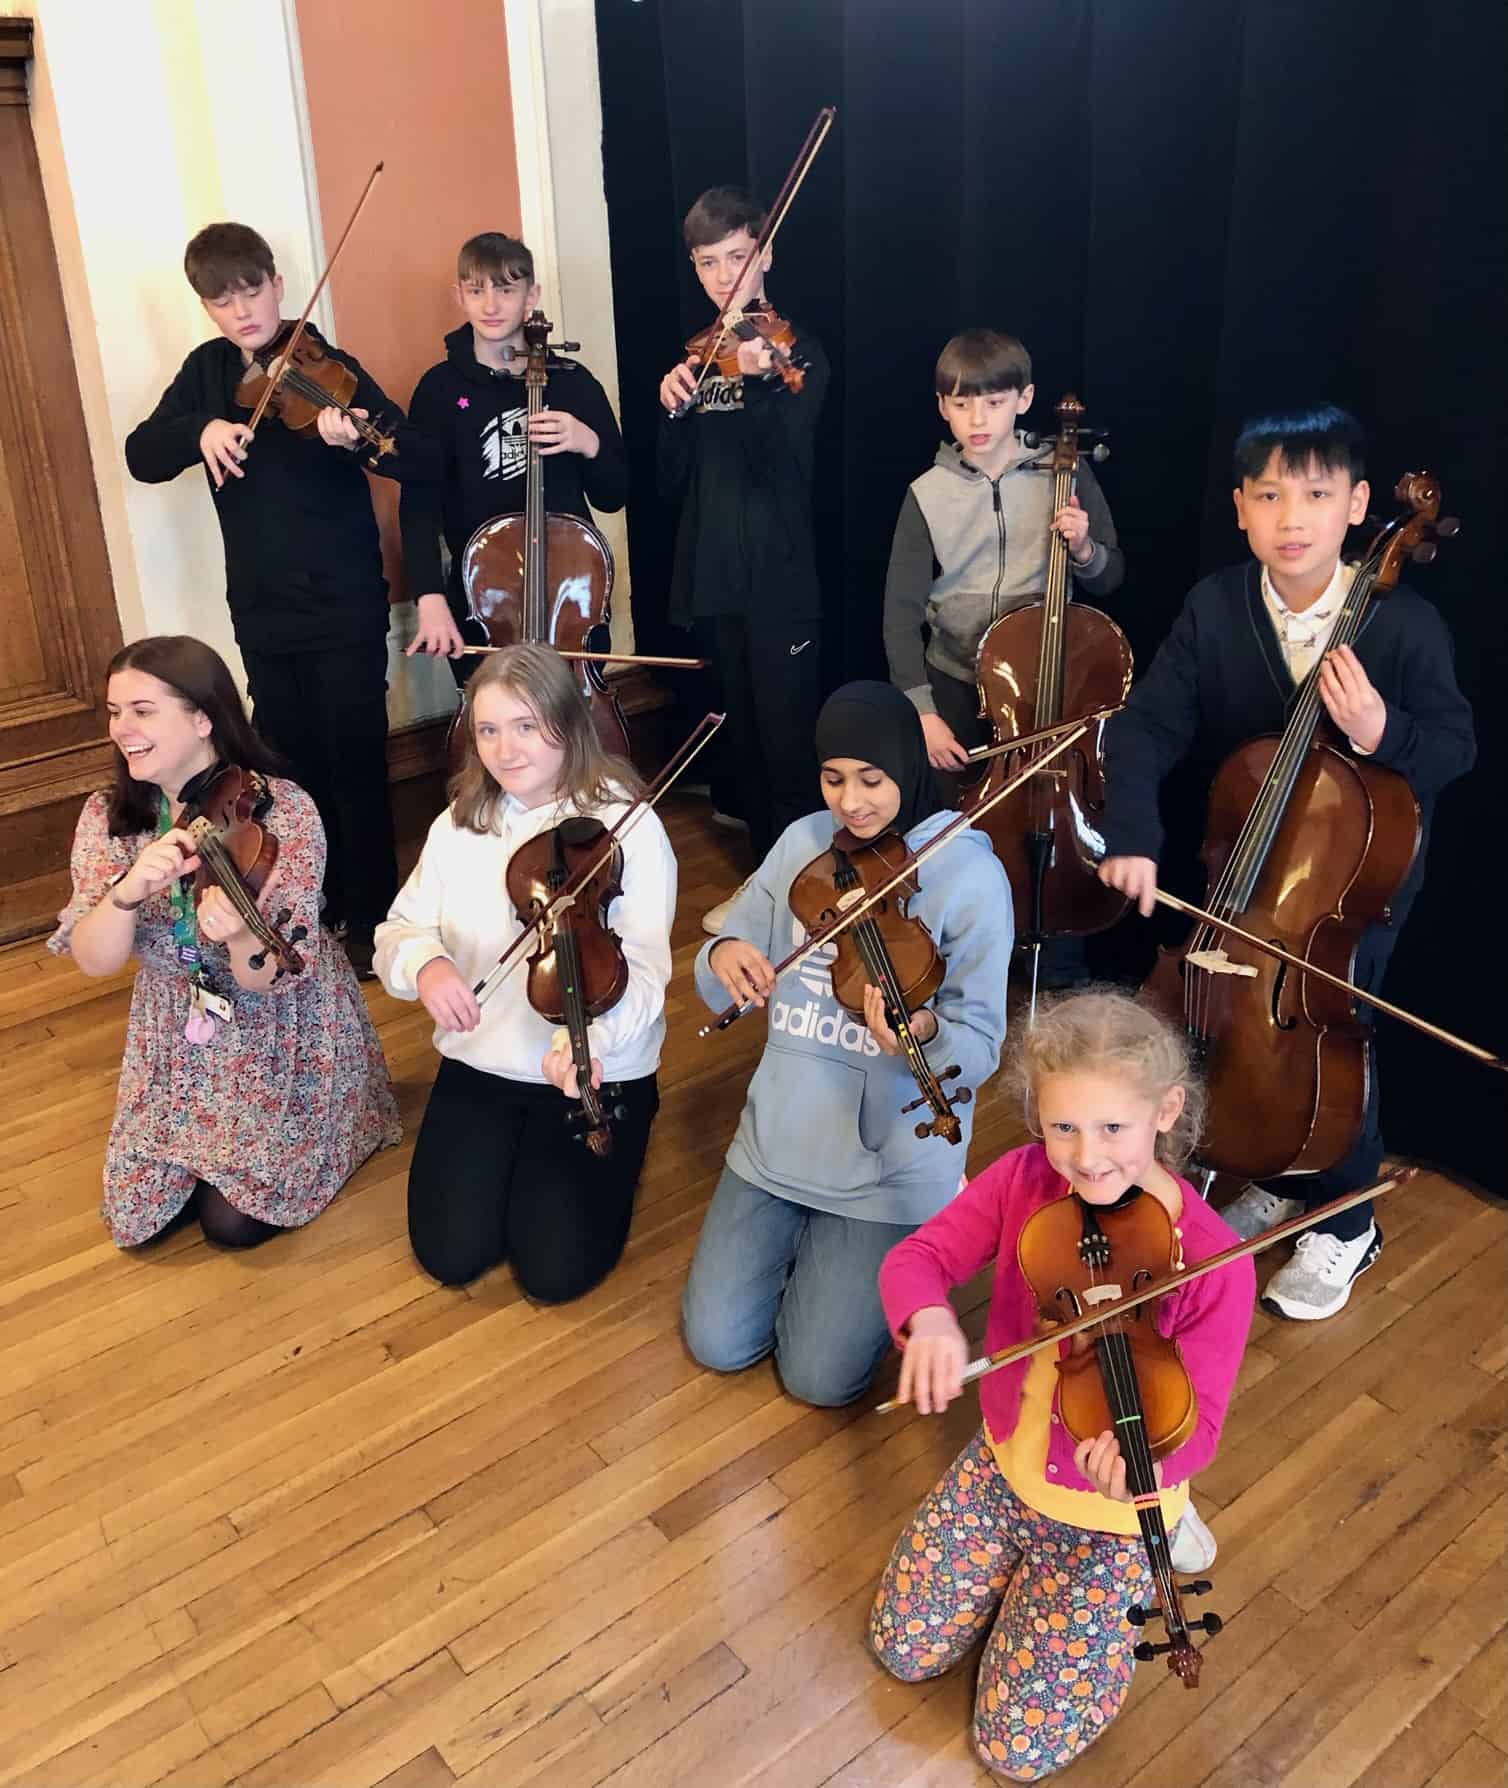 Students and staff from Laurus Cheadle Hulme hold their string instruments at the Benedetti Strings day at Stockport Town Hall.